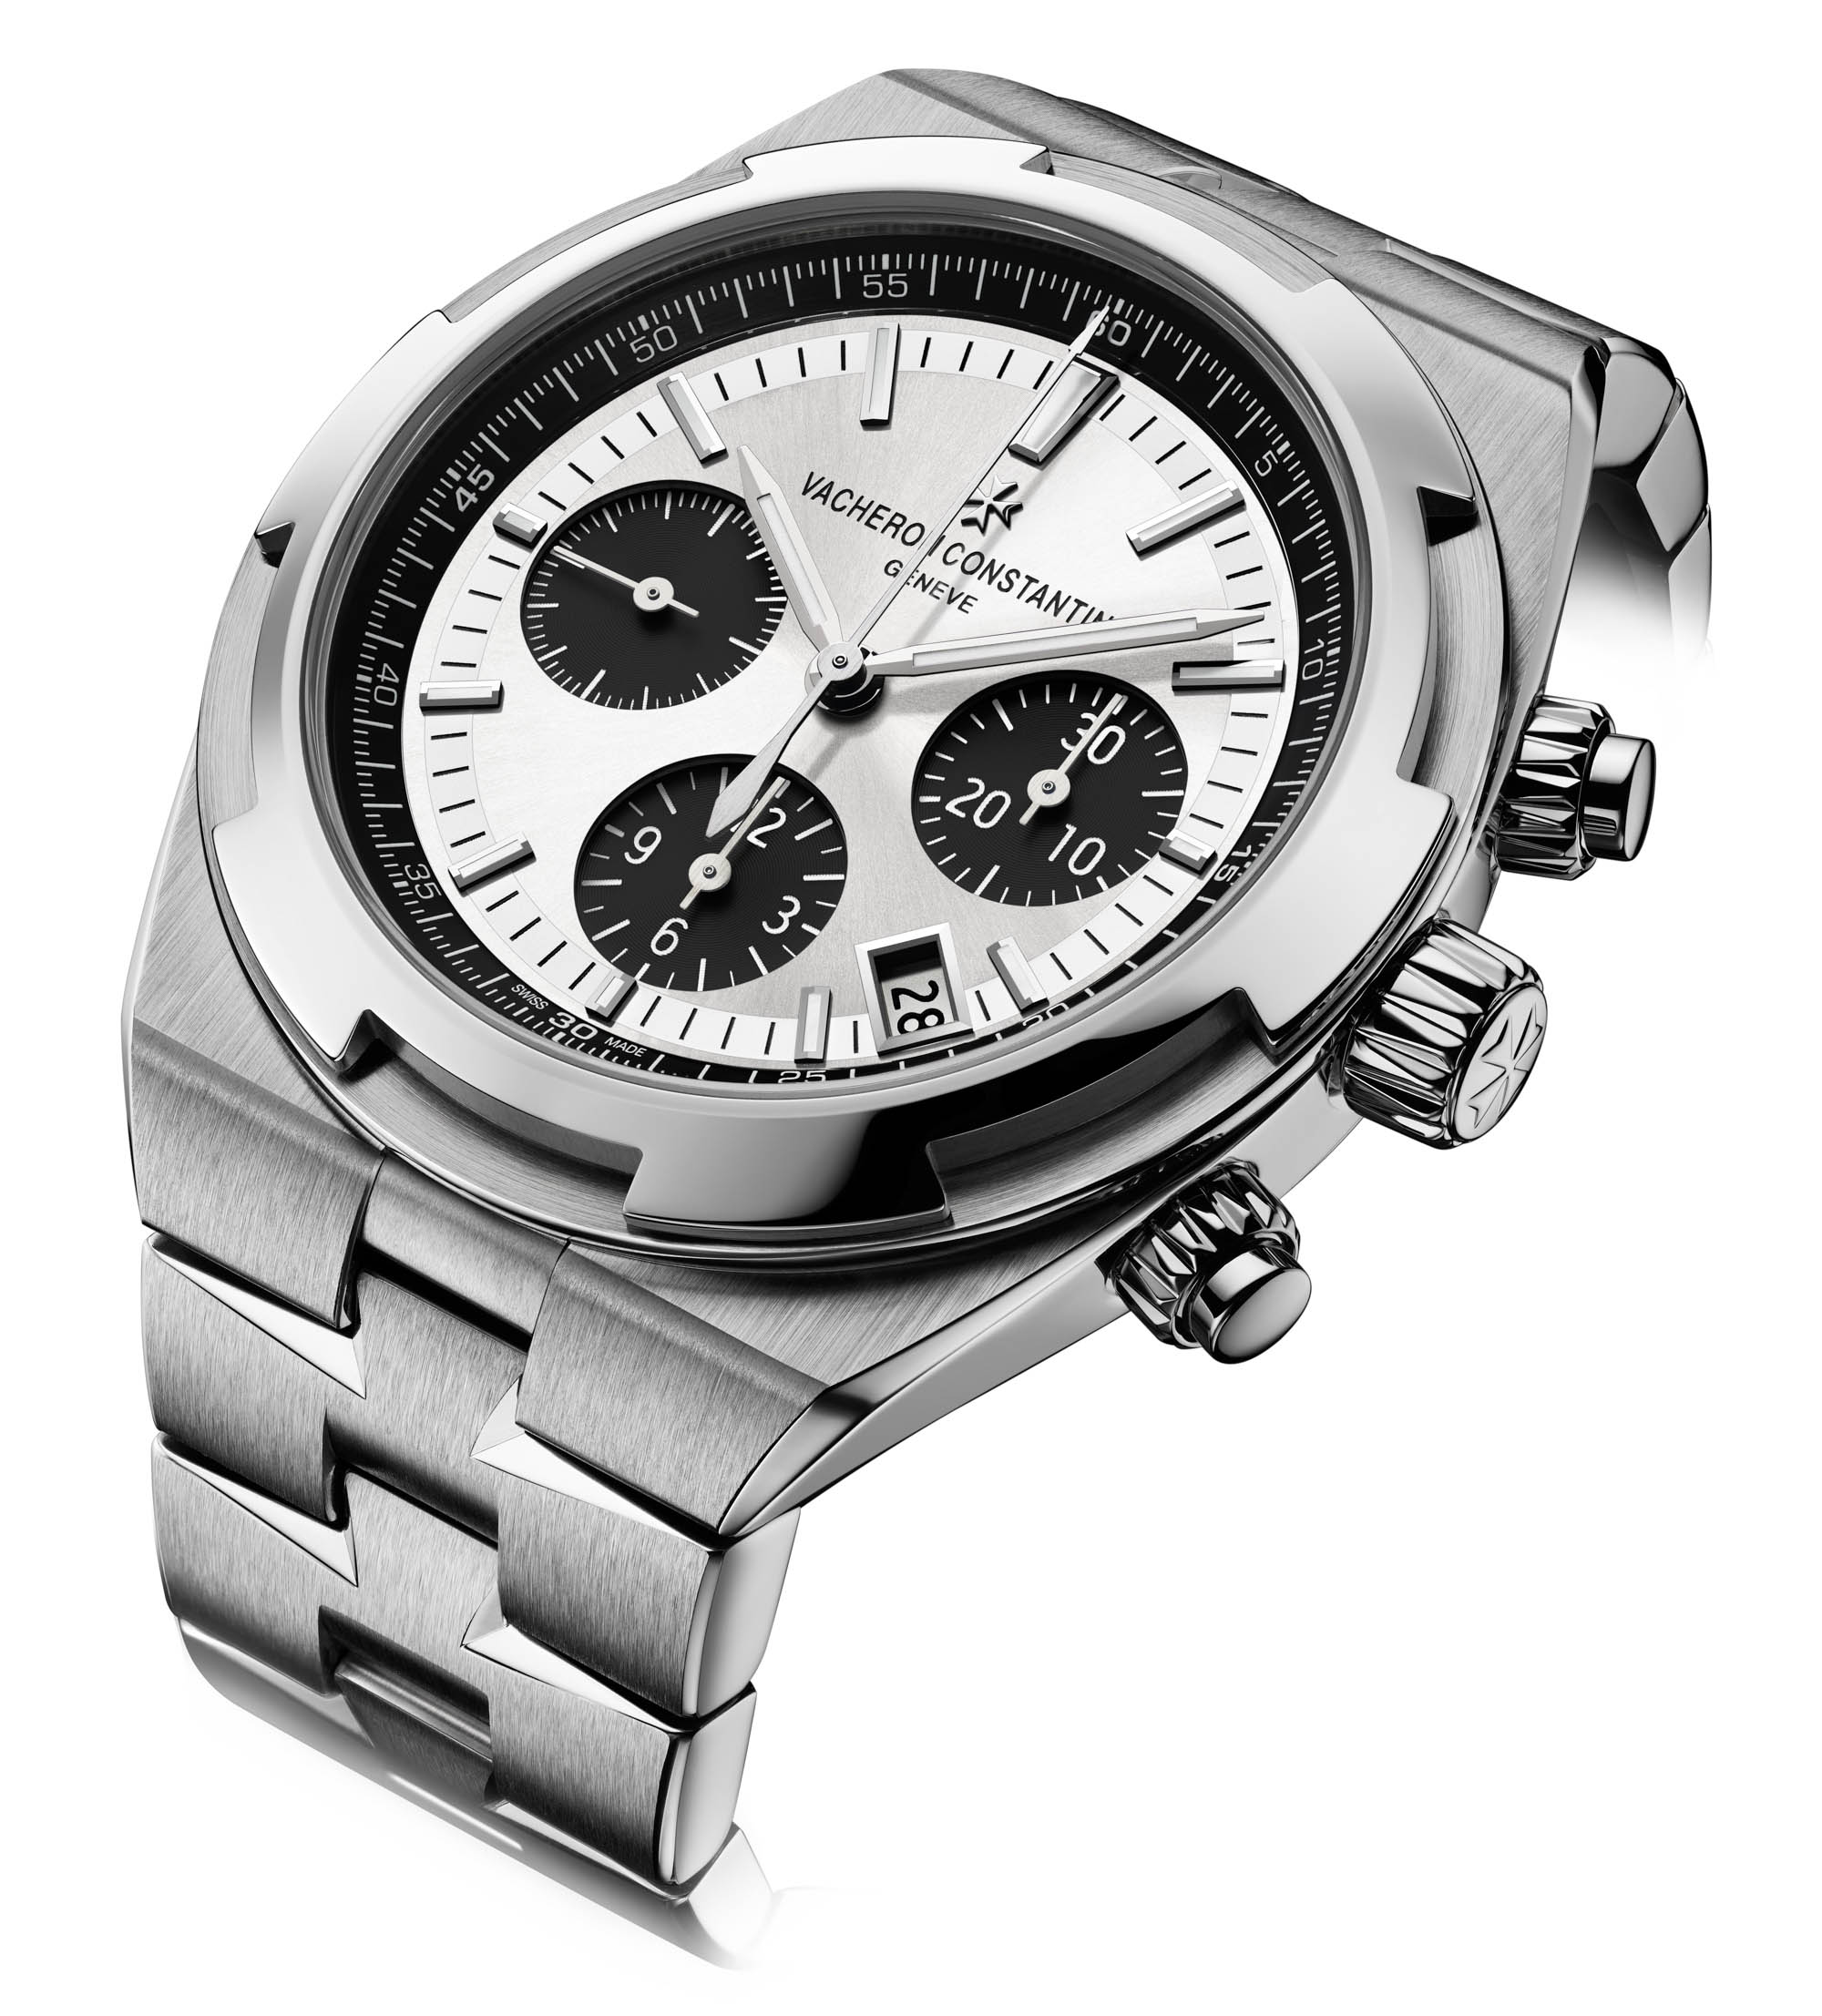 Vacheron Constantin Overseas Chronograph new Panda Dial for $53,991 for  sale from a Private Seller on Chrono24